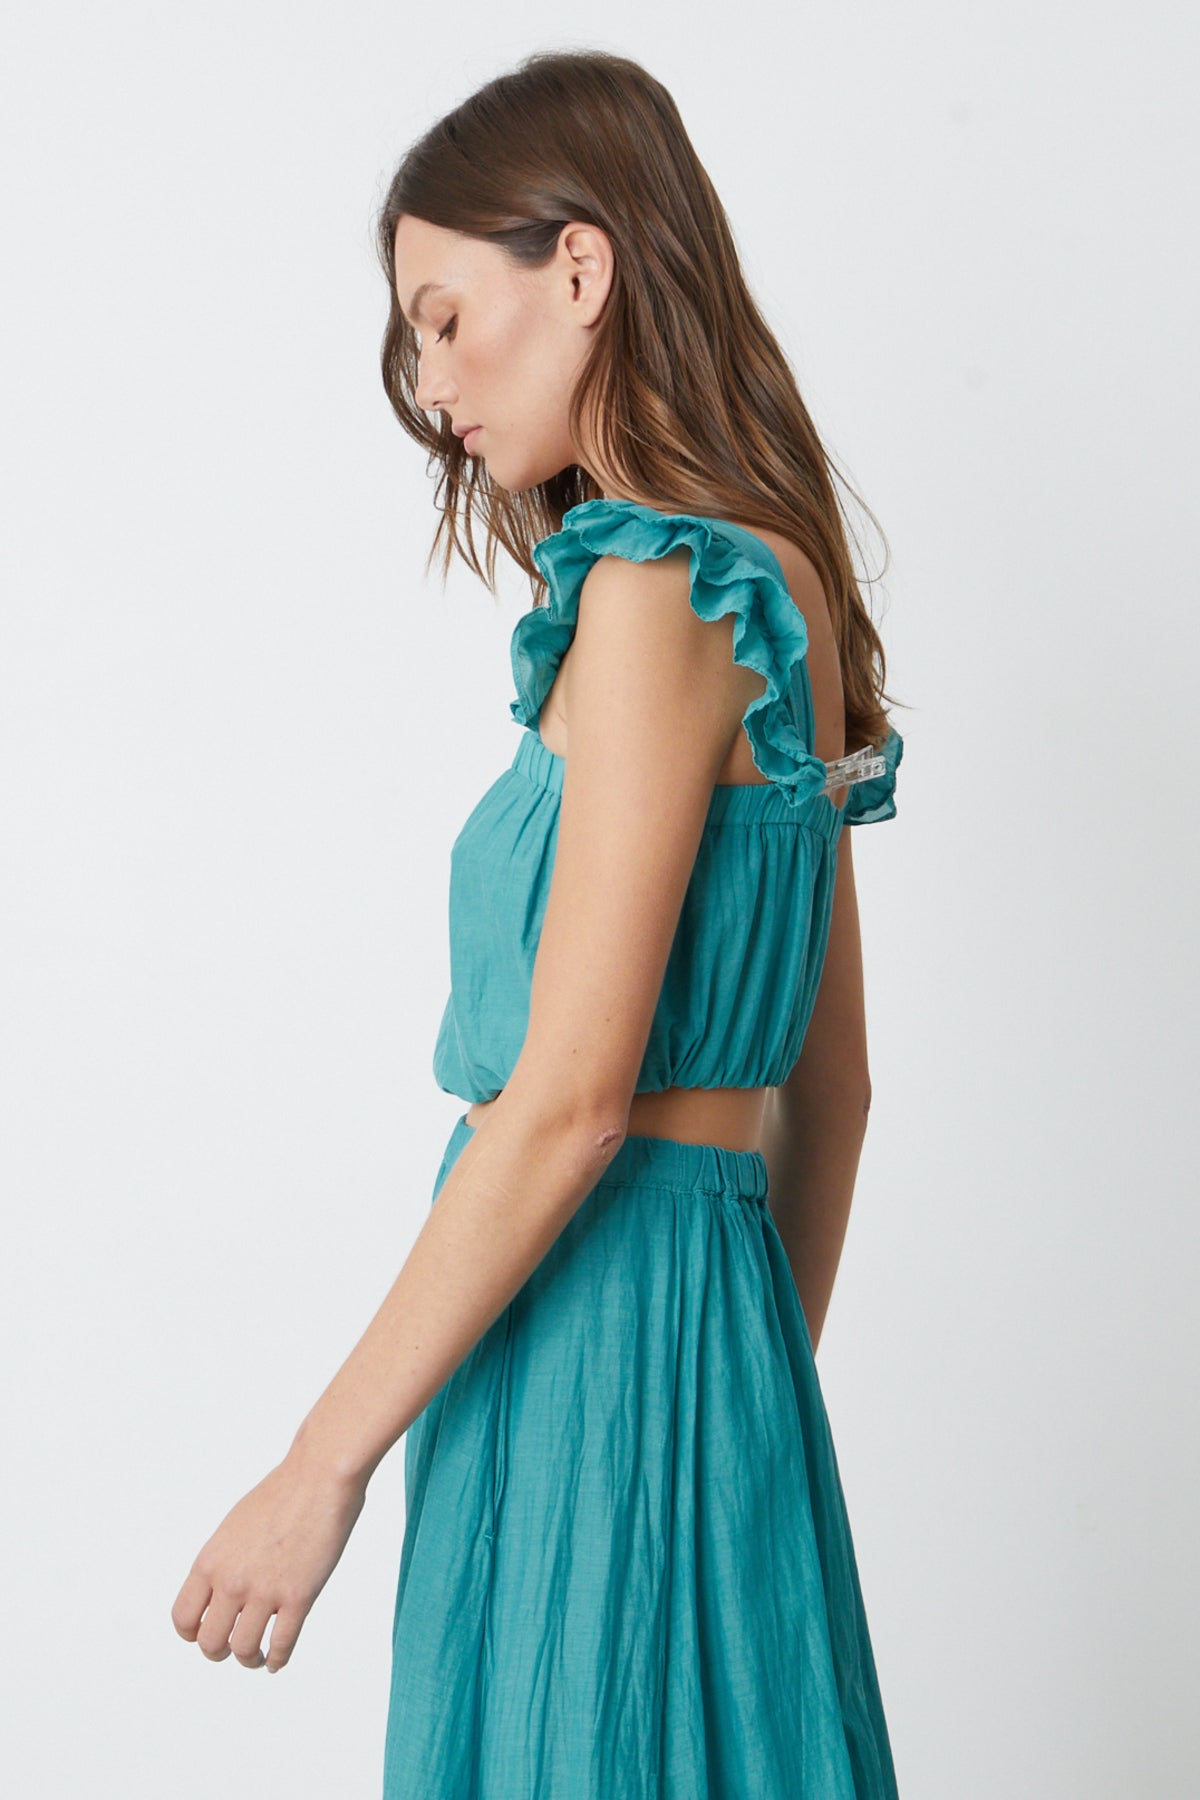 The model is wearing a GRACEN CROPPED TANK TOP by Velvet by Graham & Spencer with ruffled shoulders.-26342712082625